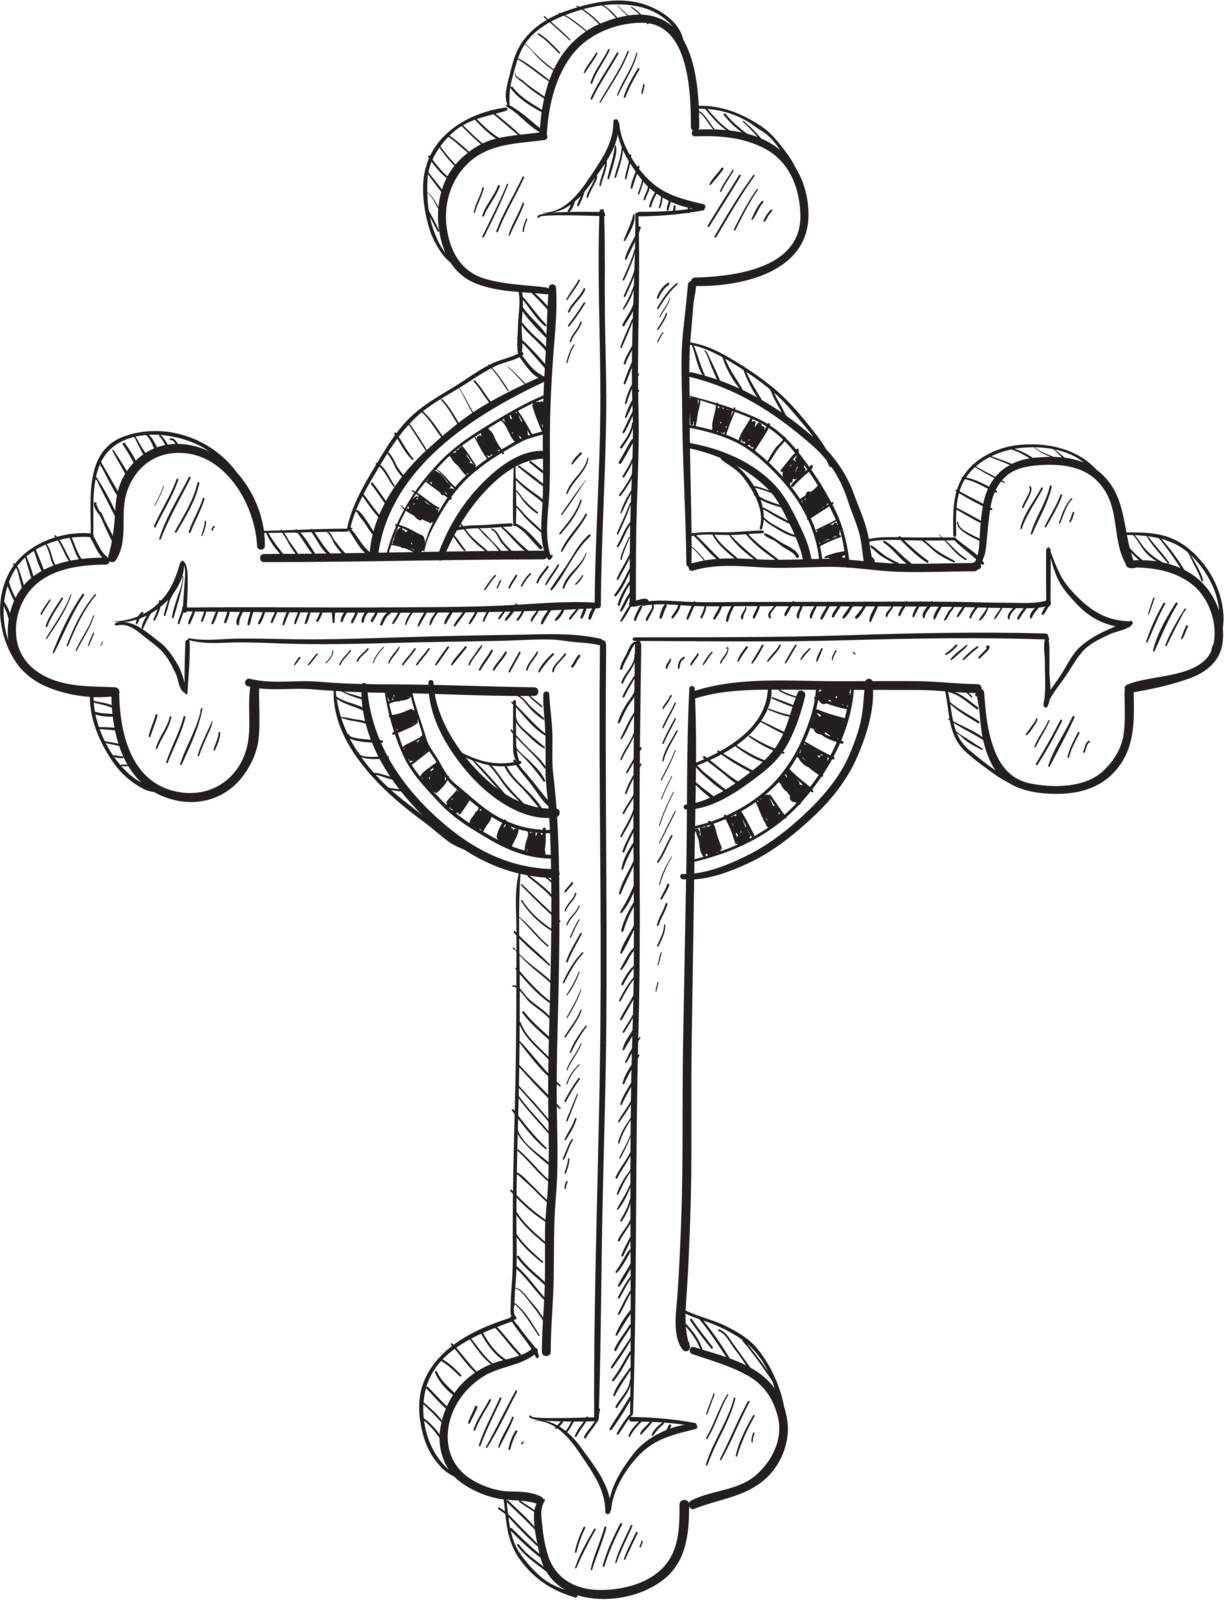 Doodle style Greek Orthodox cross illustration in vector format